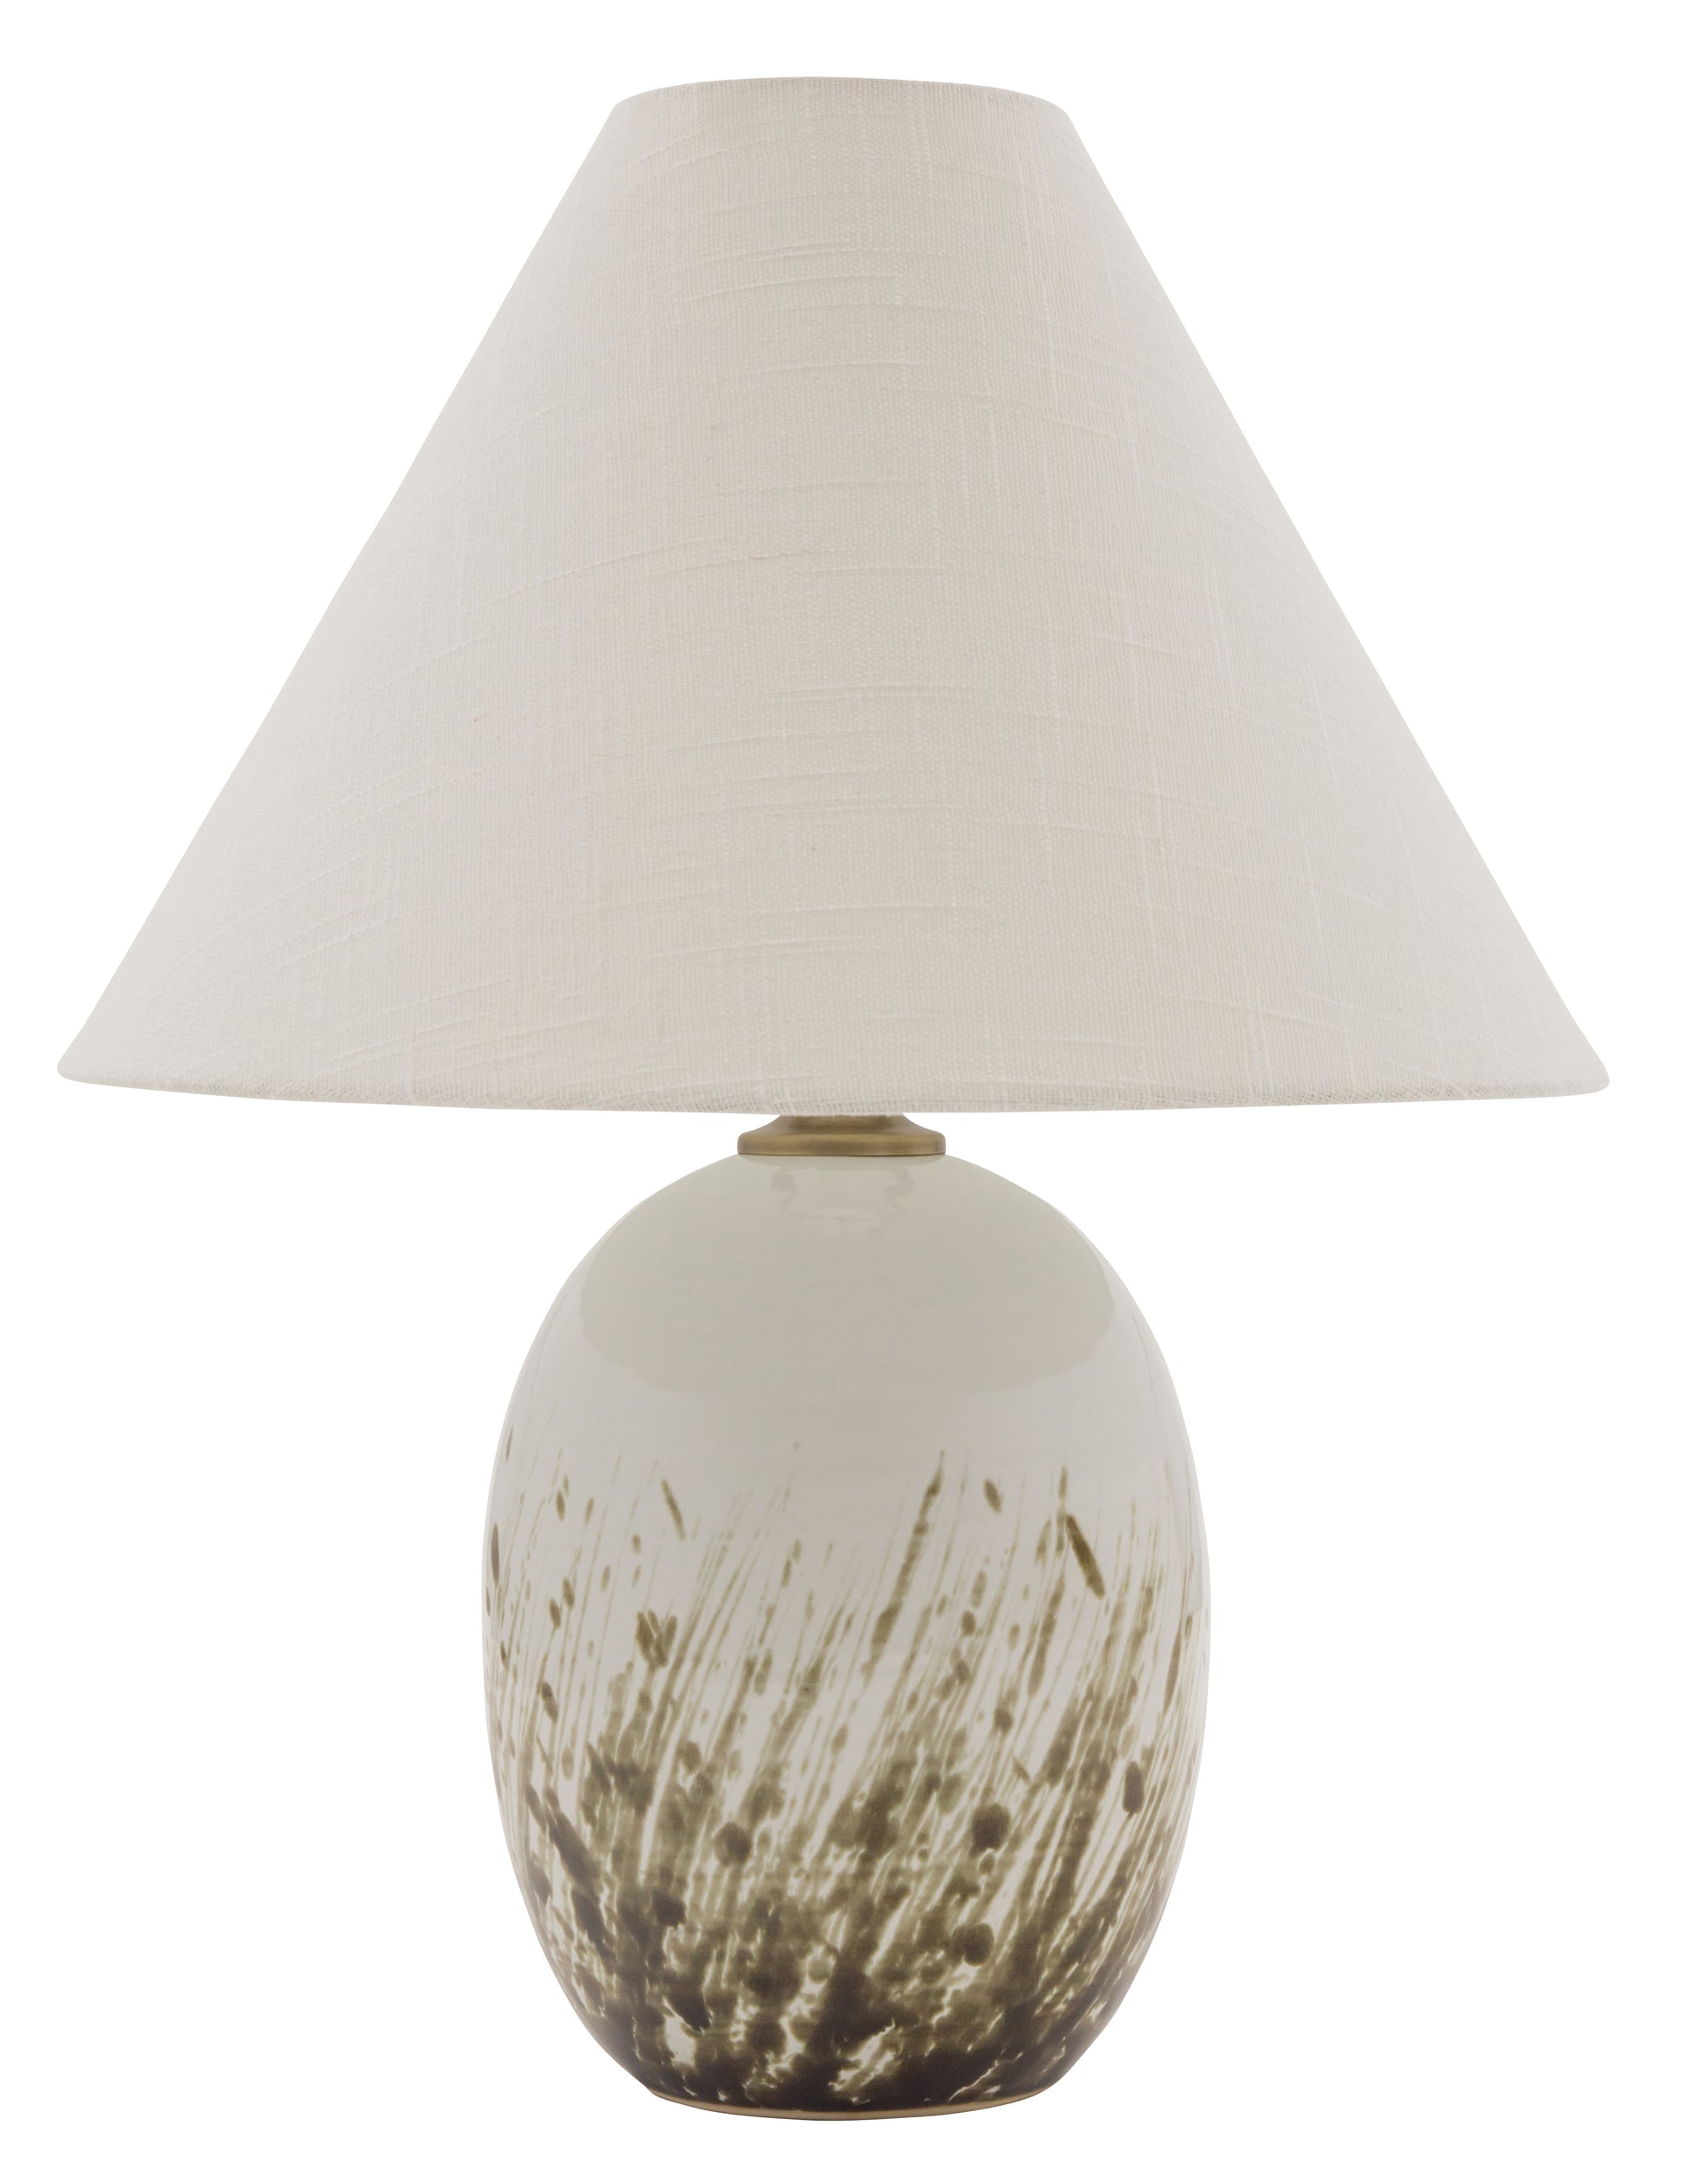 House of Troy Scatchard 22.5" Stoneware Table Lamp Decorated White Gloss GS140-DWG